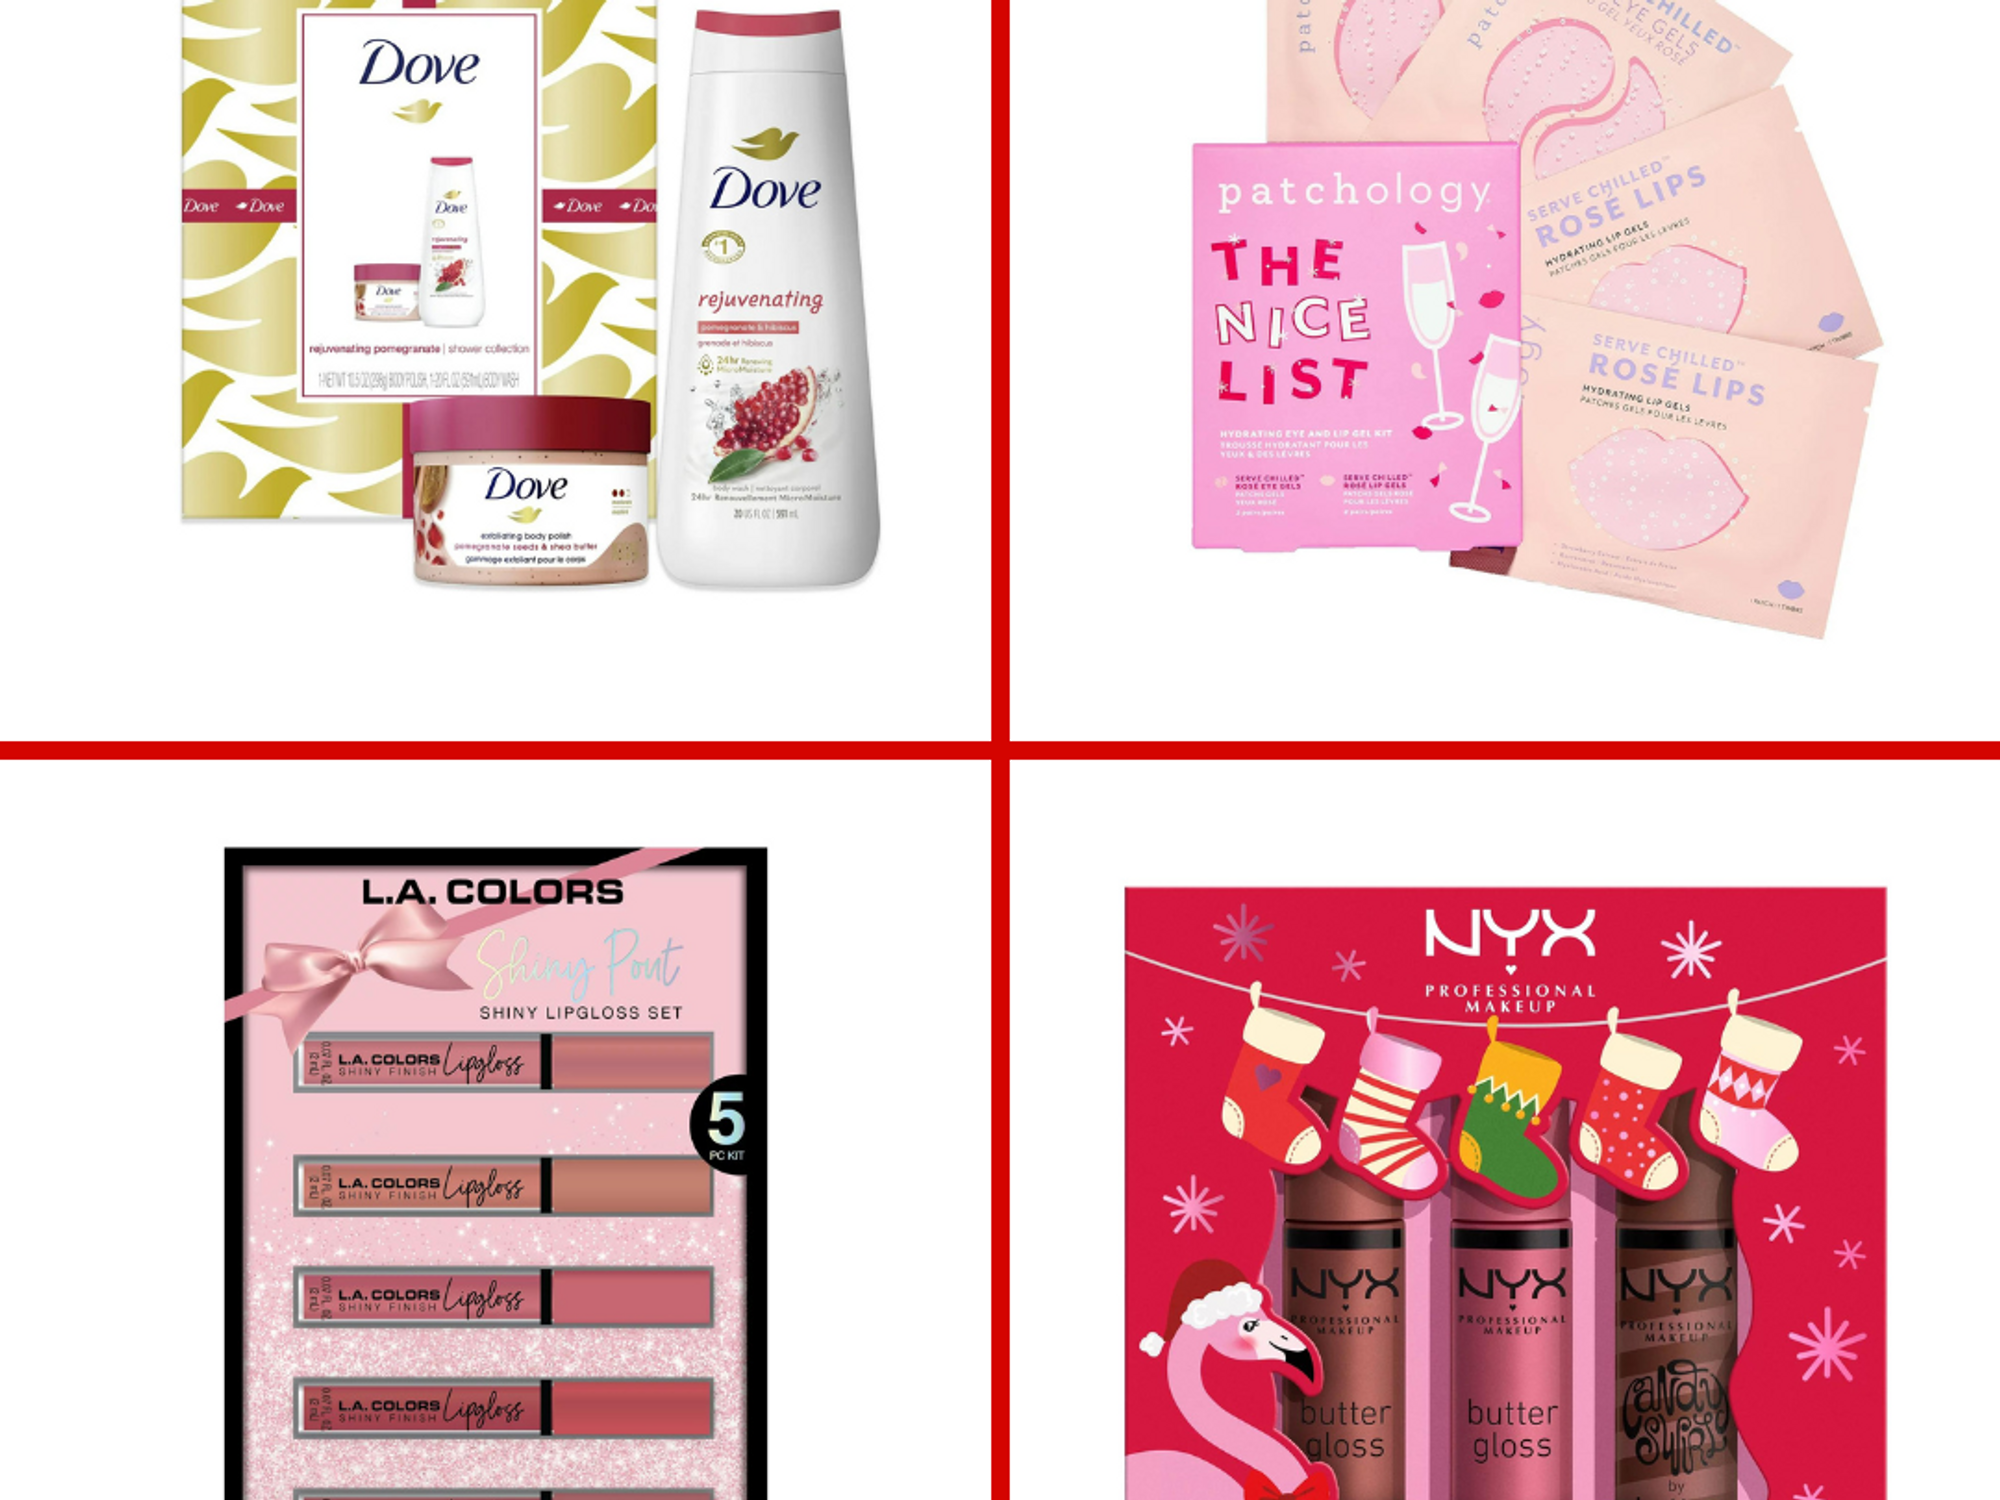 https://www.brit.co/media-library/23-walmart-beauty-gifts.png?id=50461901&width=2000&height=1500&coordinates=0%2C135%2C0%2C135